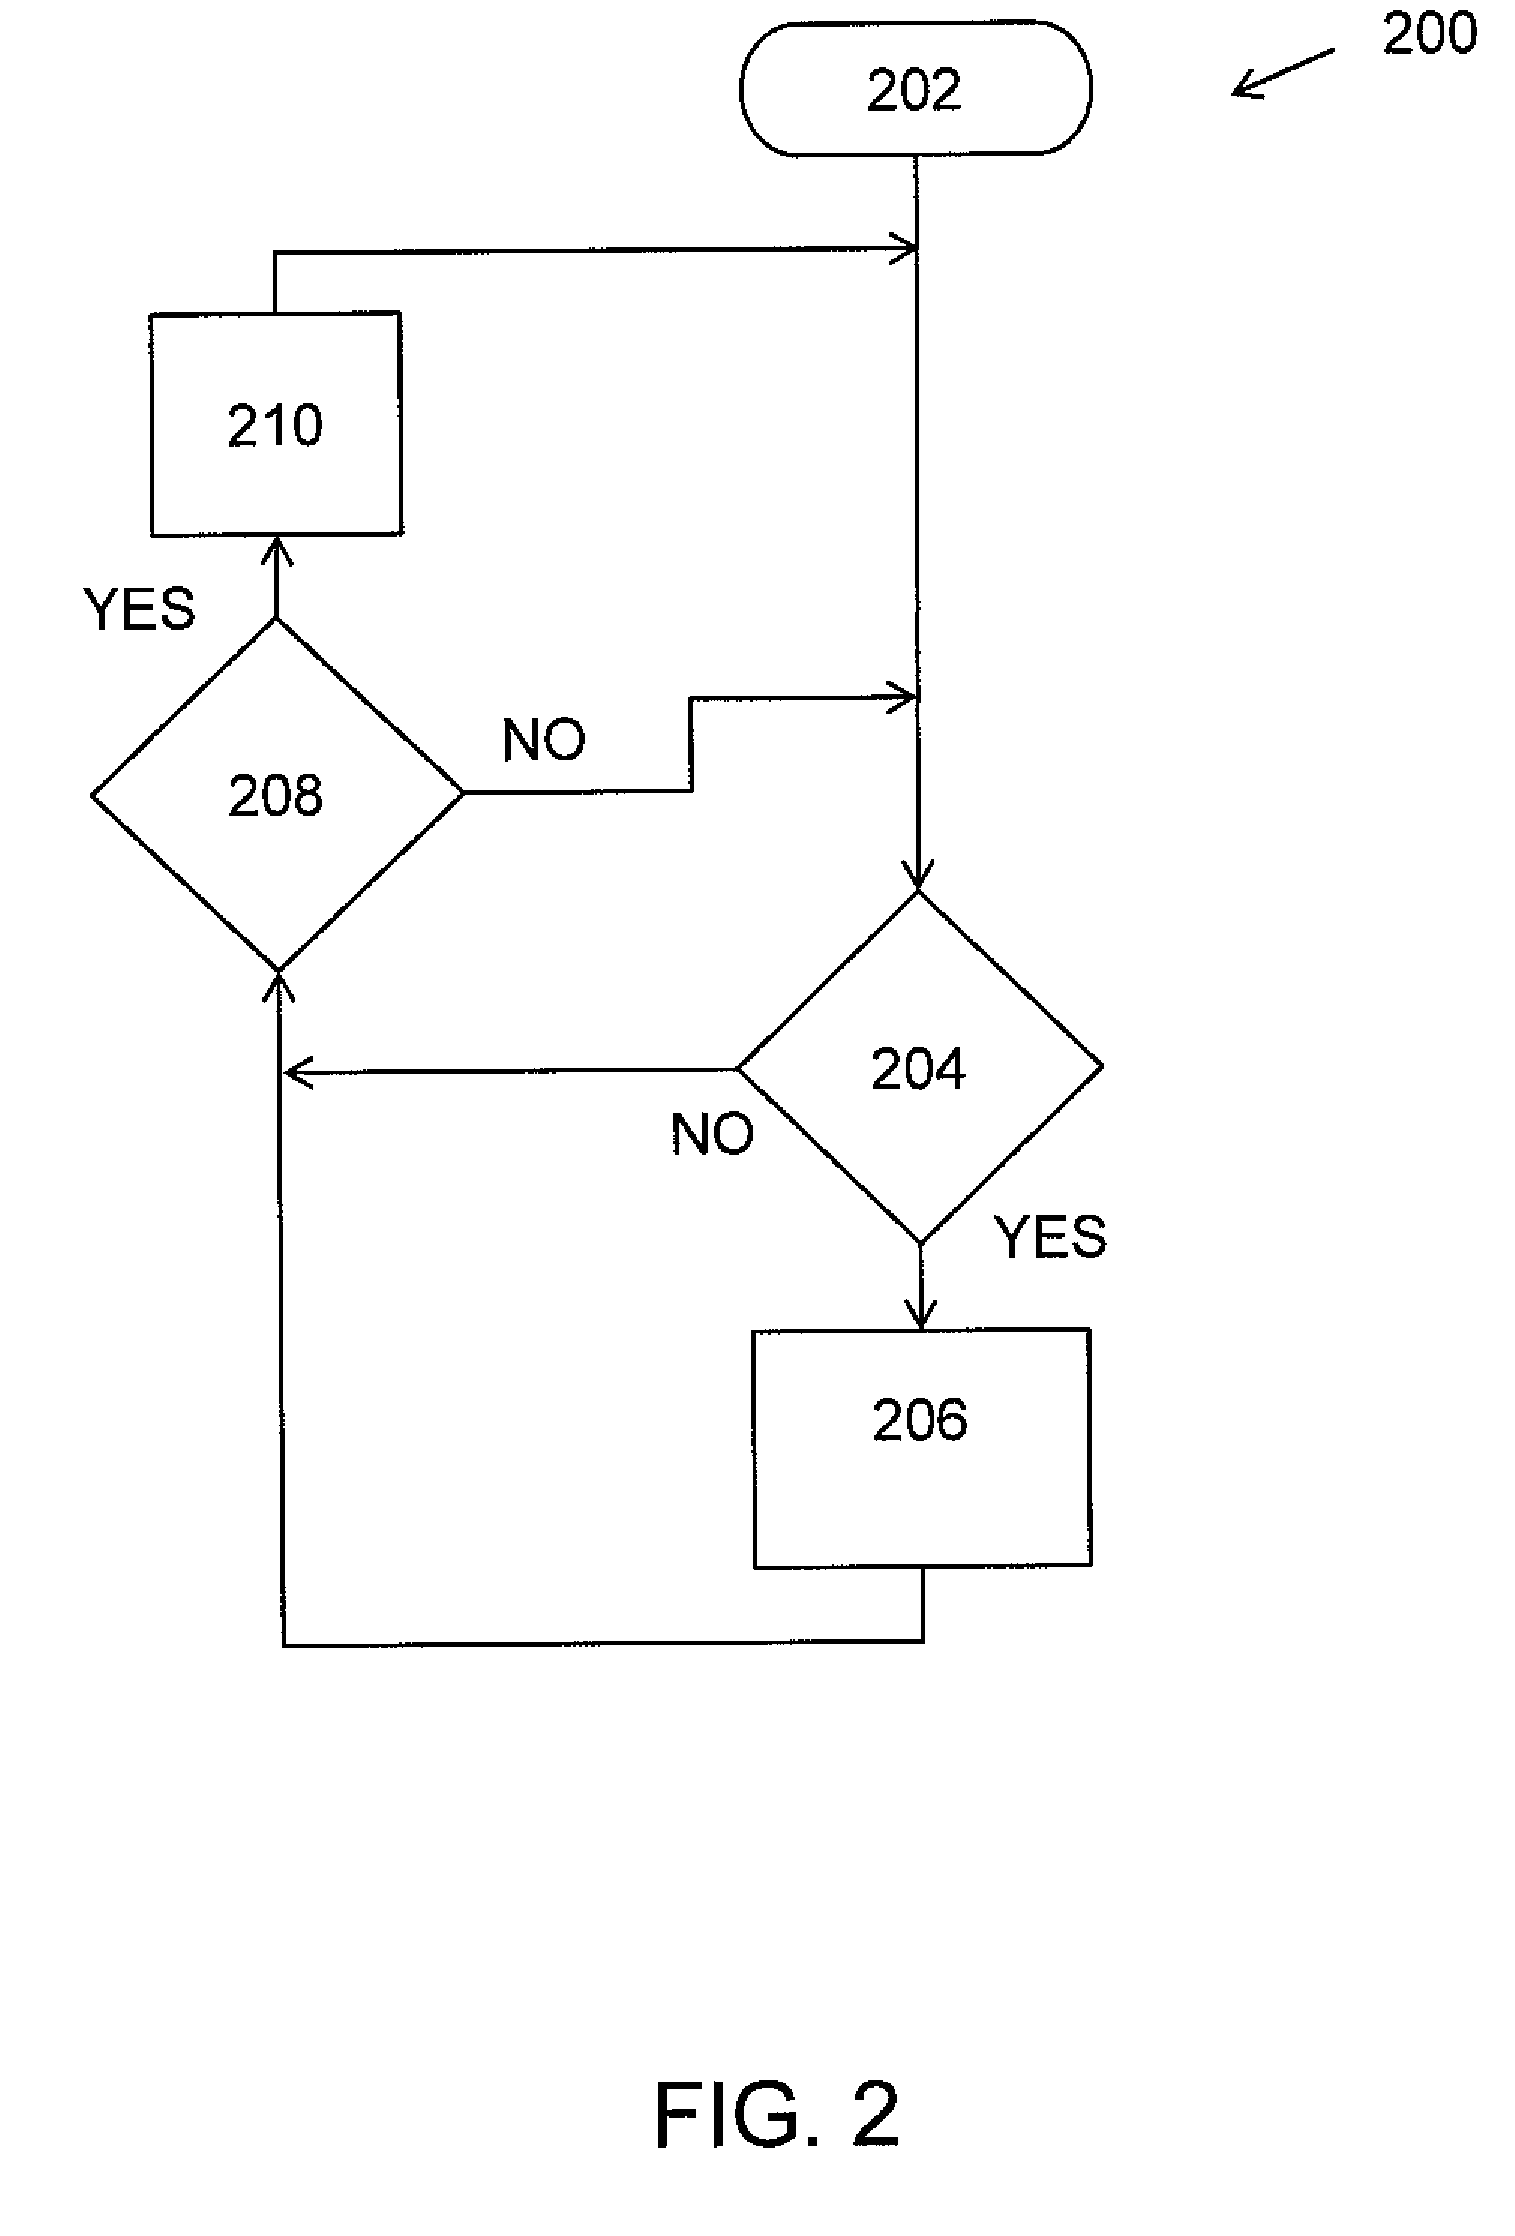 Regenerative braking system for a hybrid electric vehicle and a corresponding method